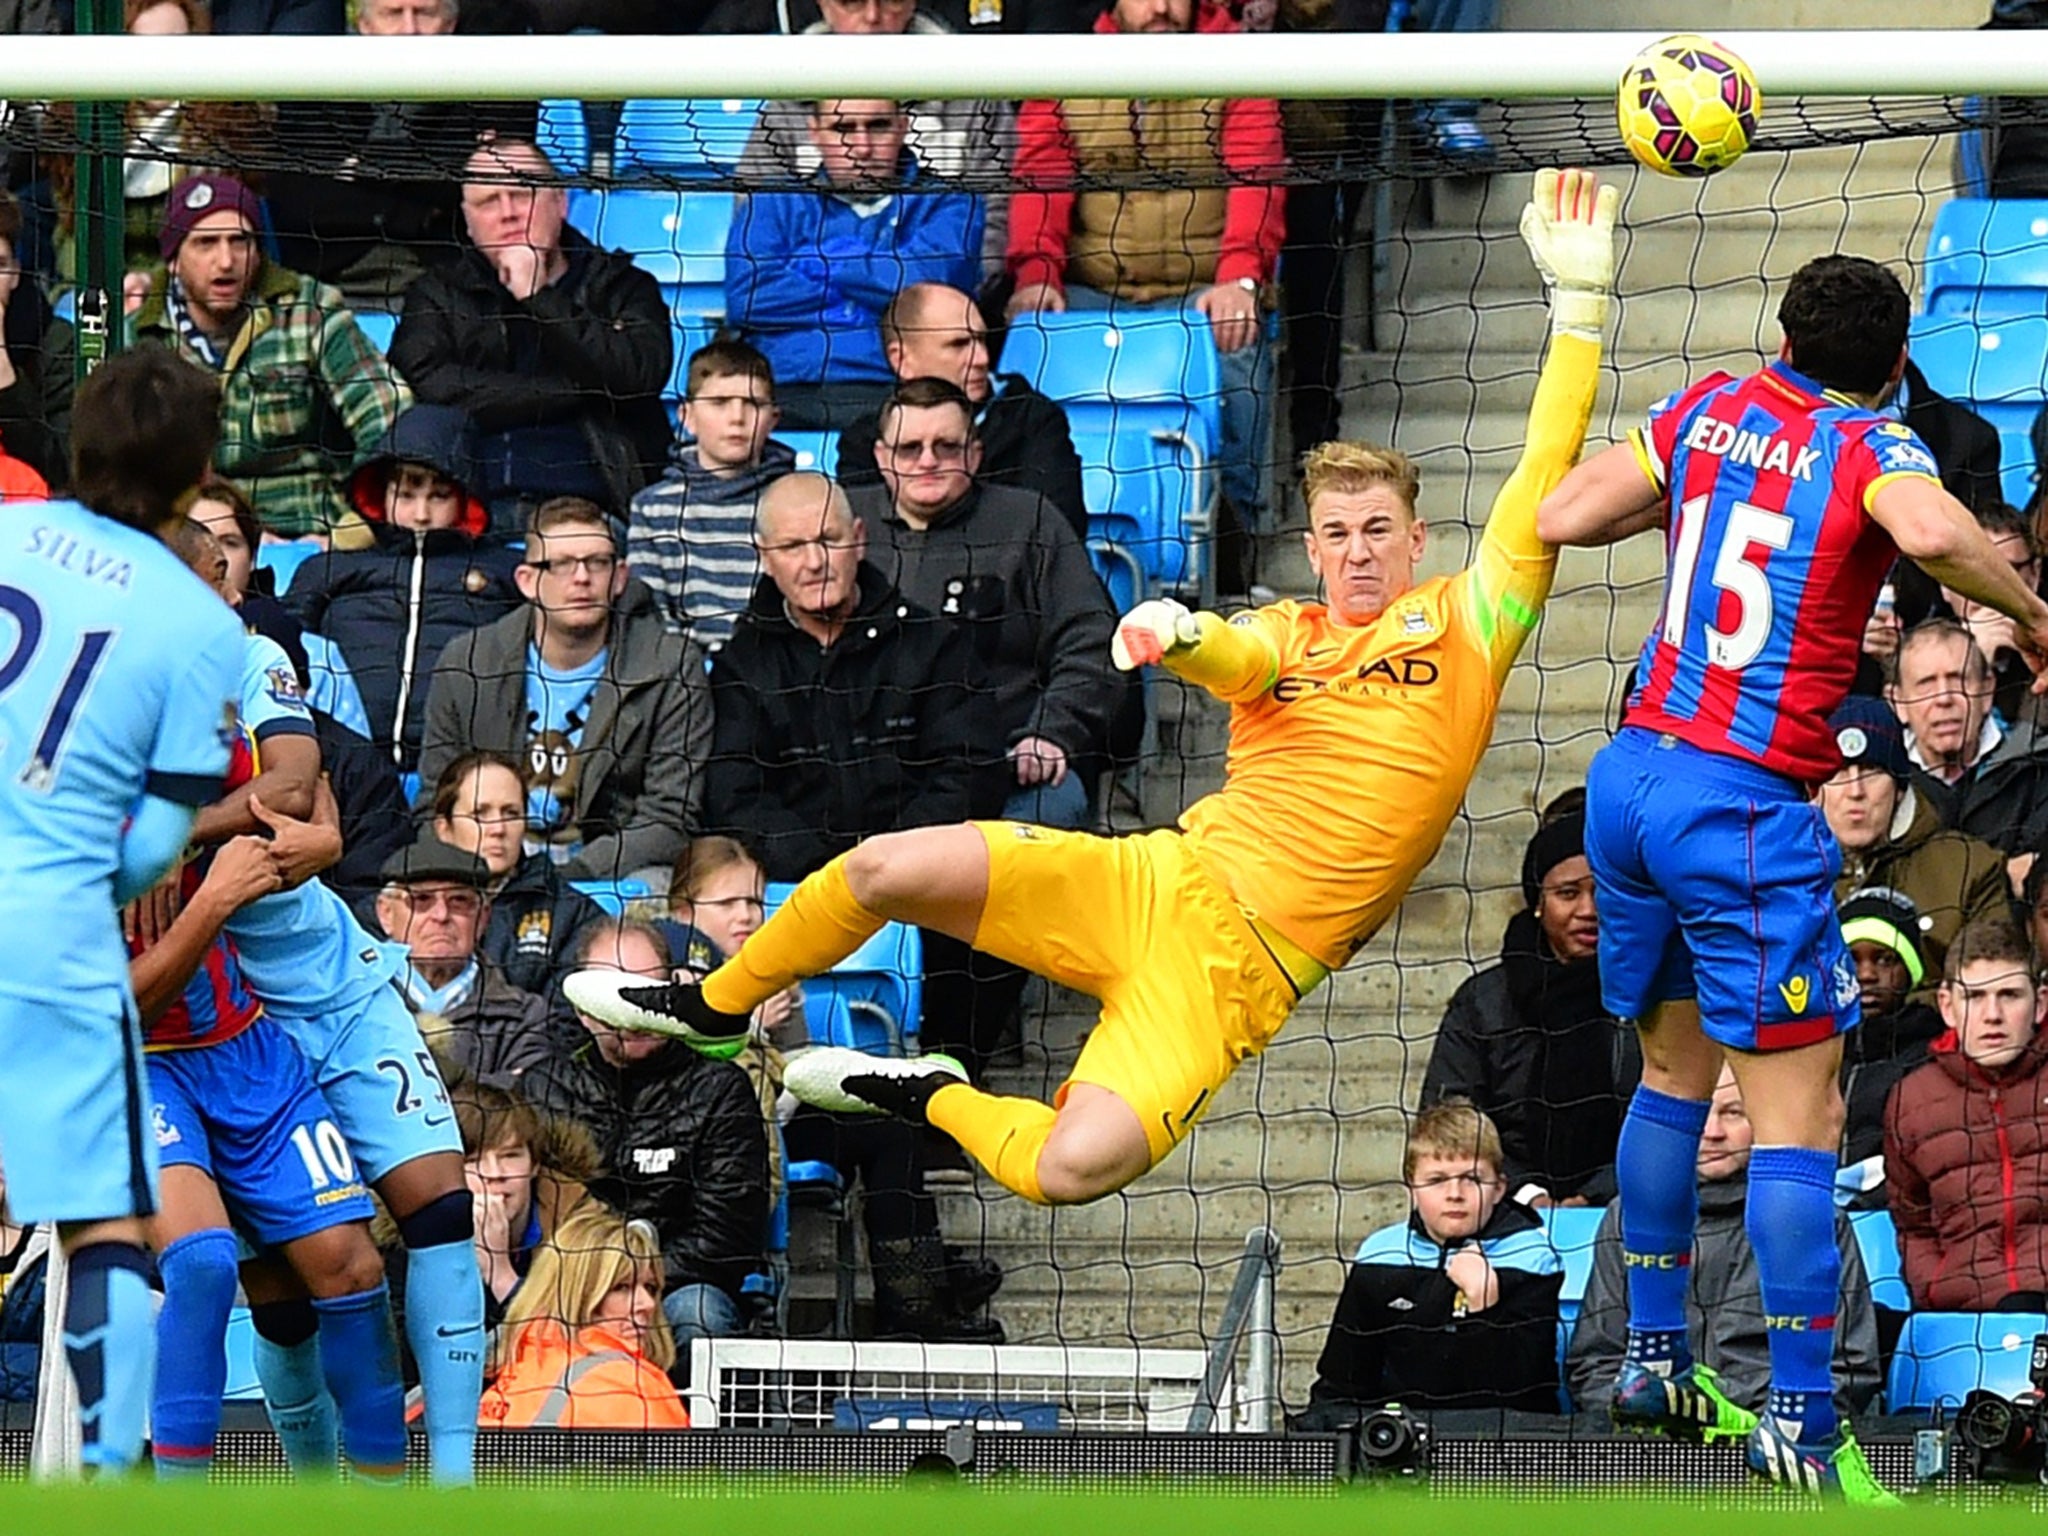 Joe Hart, of Manchester City and England, stands alone as a top-class English goalkeeper